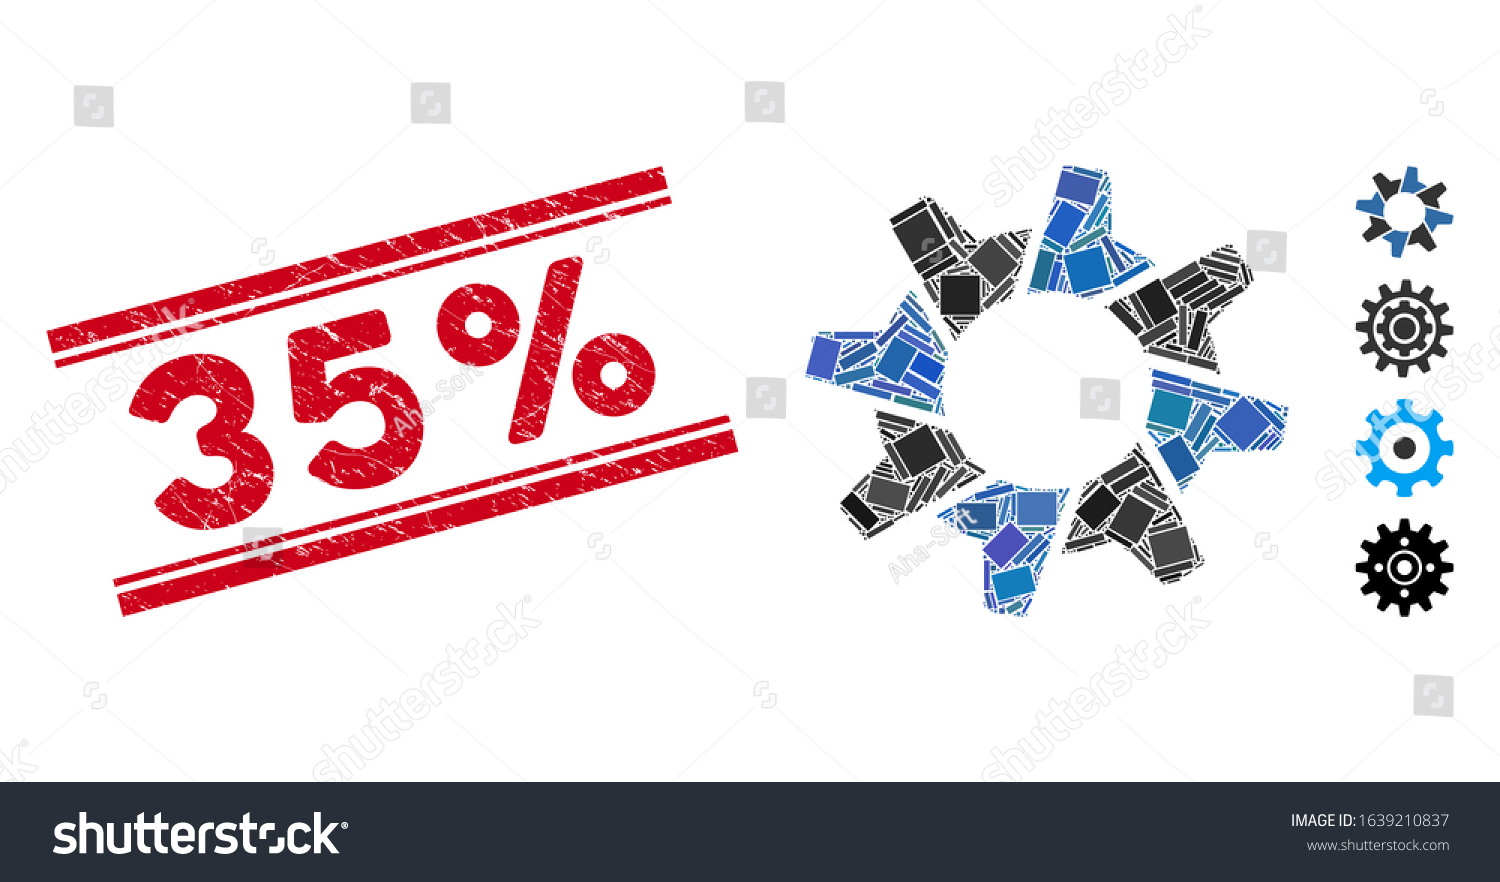 SVG of Mosaic tooth gear icon and red 35% stamp between double parallel lines. Flat vector tooth gear mosaic icon of randomized rotated rectangle items. Red 35% stamp imprint with rubber textures. svg